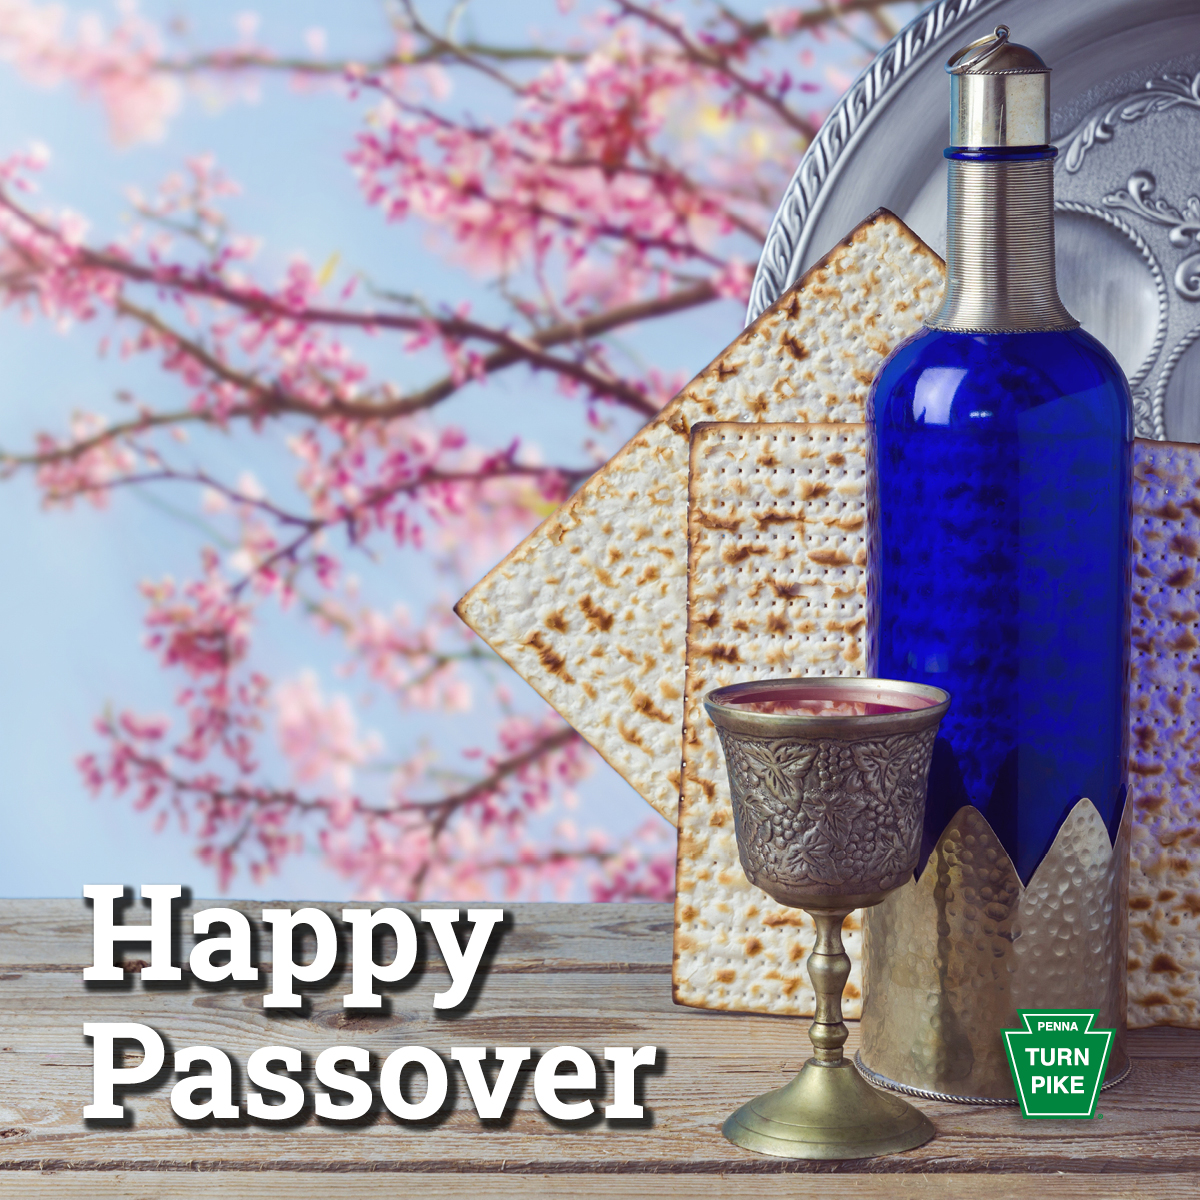 Happy Passover from the PA Turnpike!